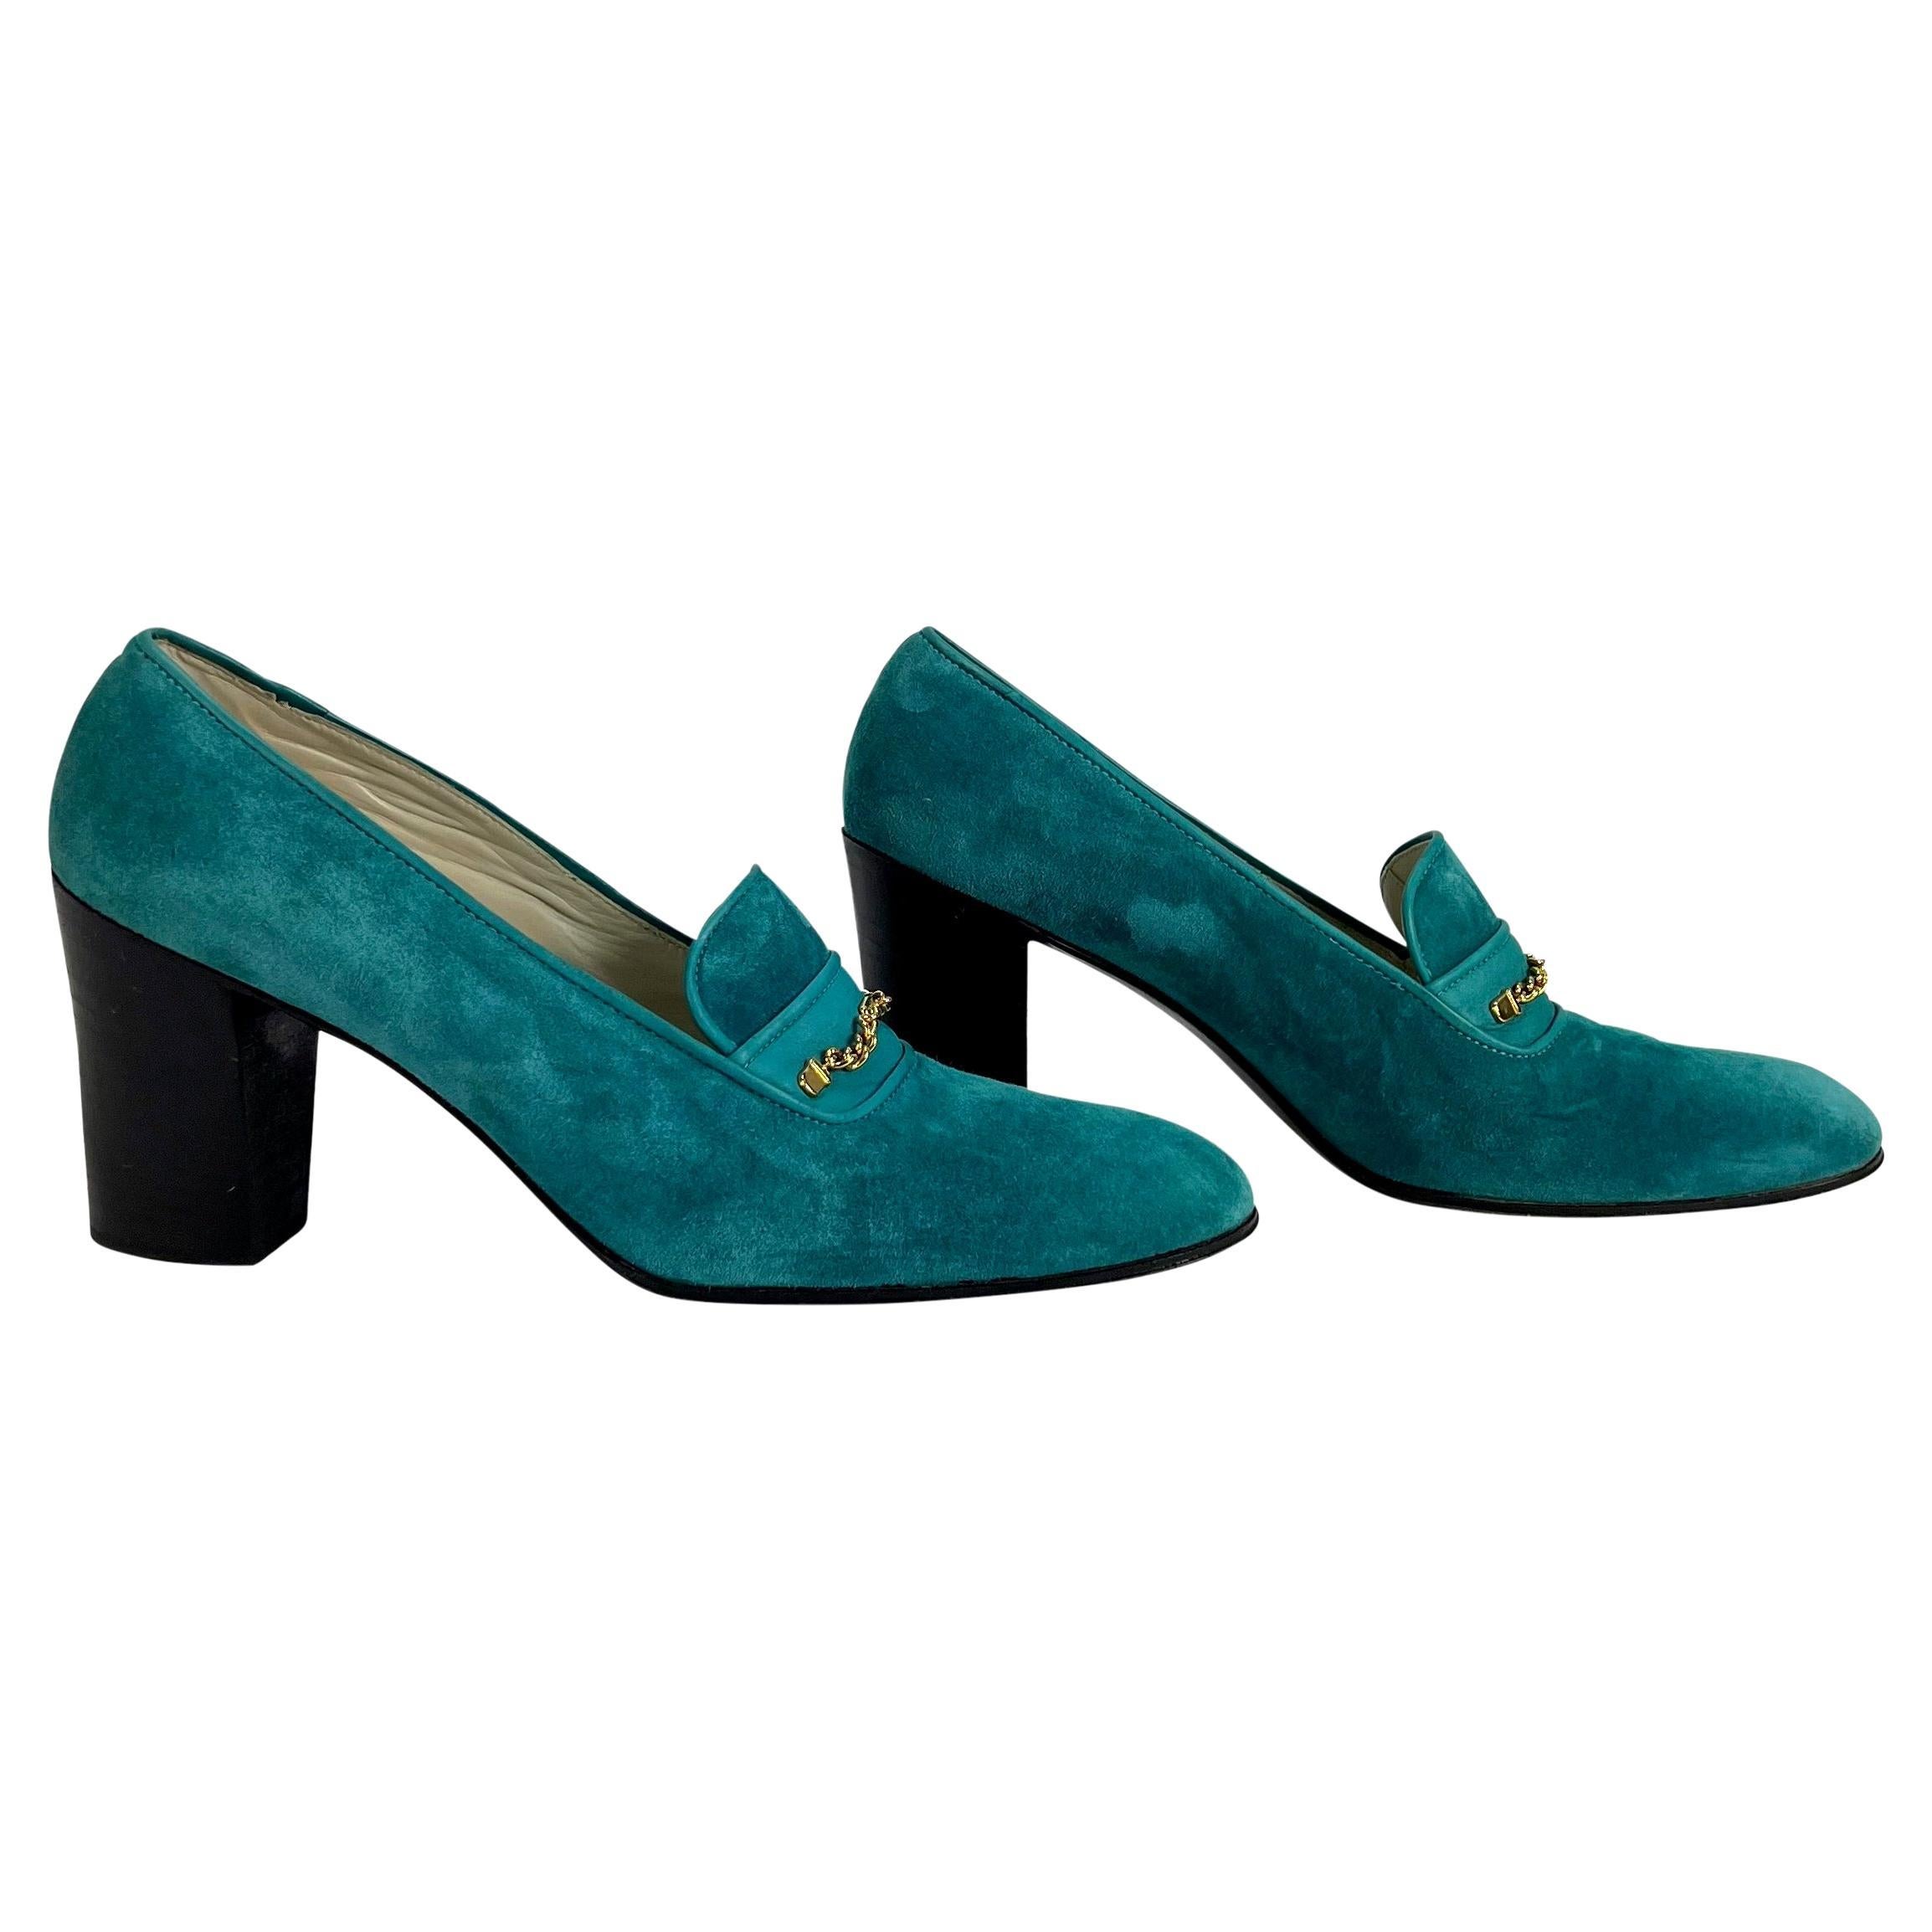 Presenting a fabulous pair of teal suede Gucci loafer heels. From the 1970s, this incredible pair of heels features a square toe and is made complete with a gold chain detail with Gucci's 'GG' monogram centrally placed. Includes original Gucci shoe